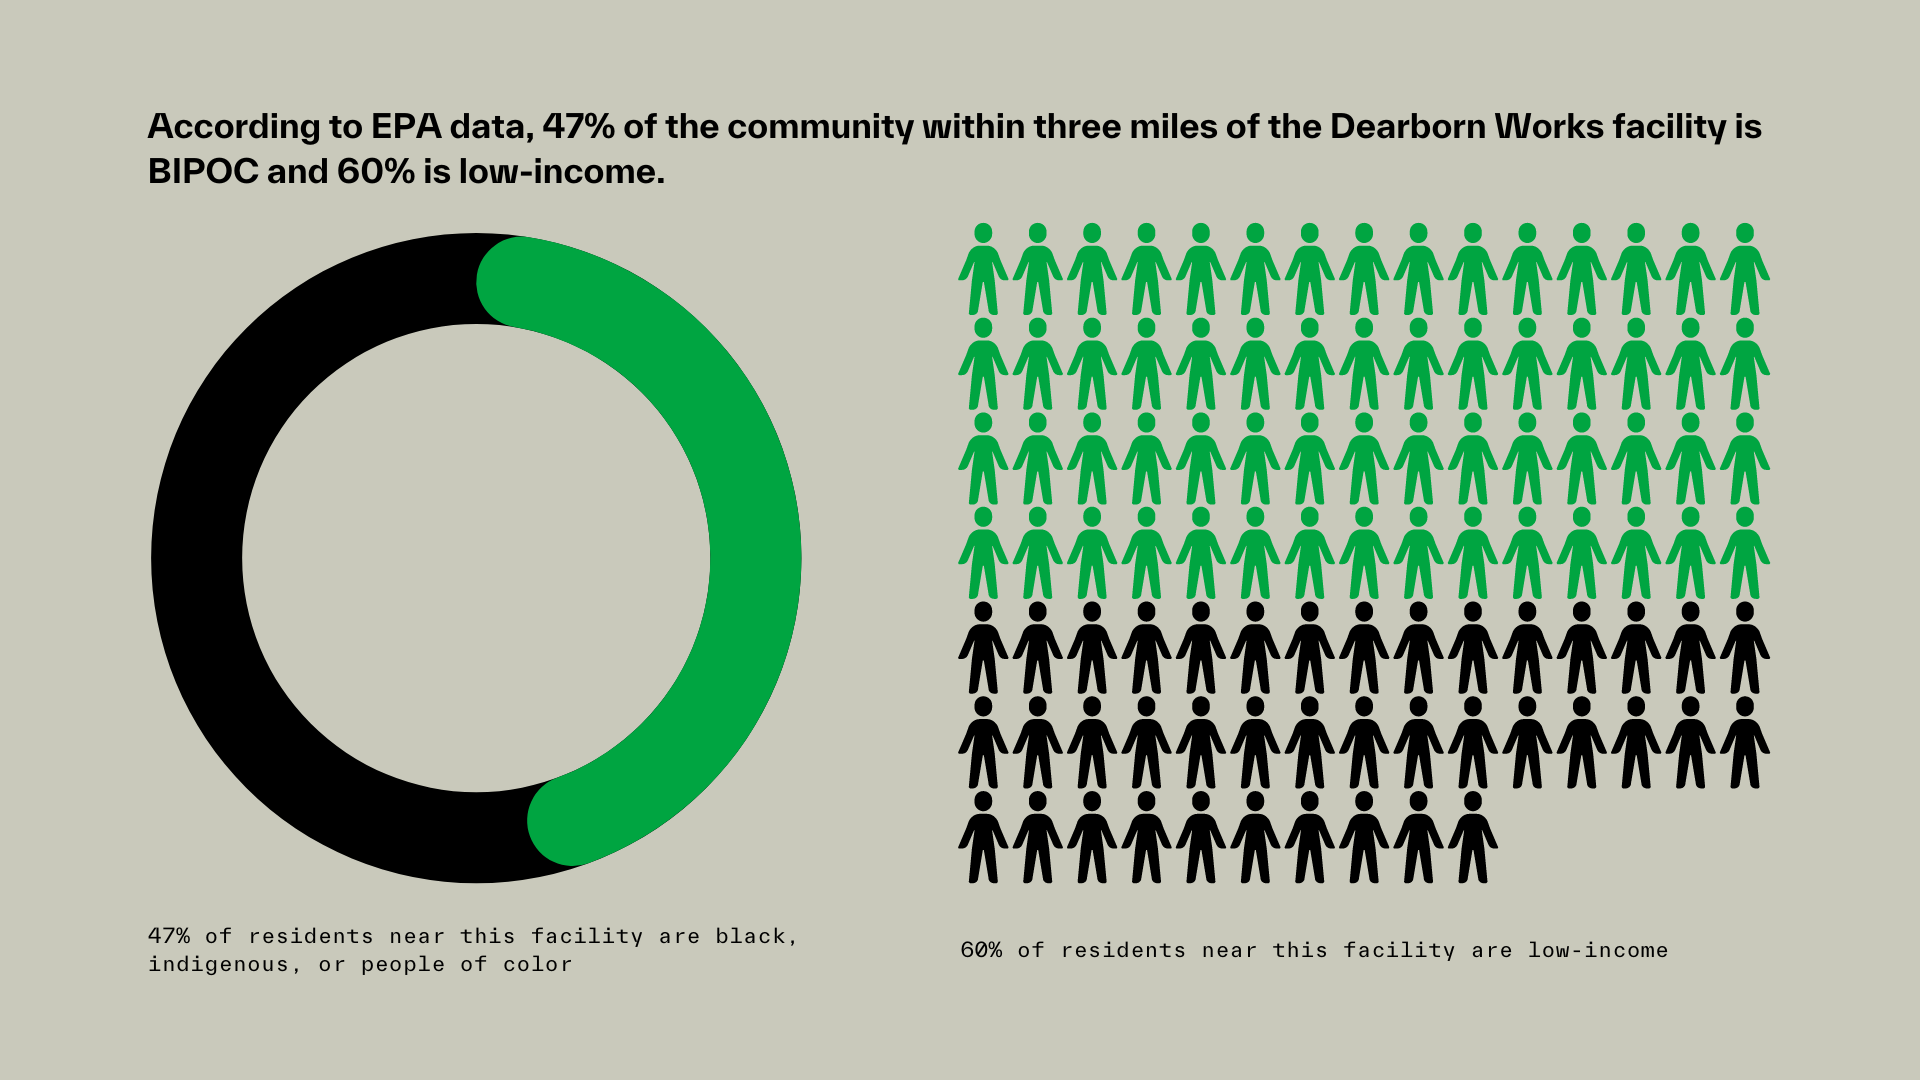 According to EPA data, 47% of the community within three miles of Dearborn Works is BIPOC and 60% is low-income.